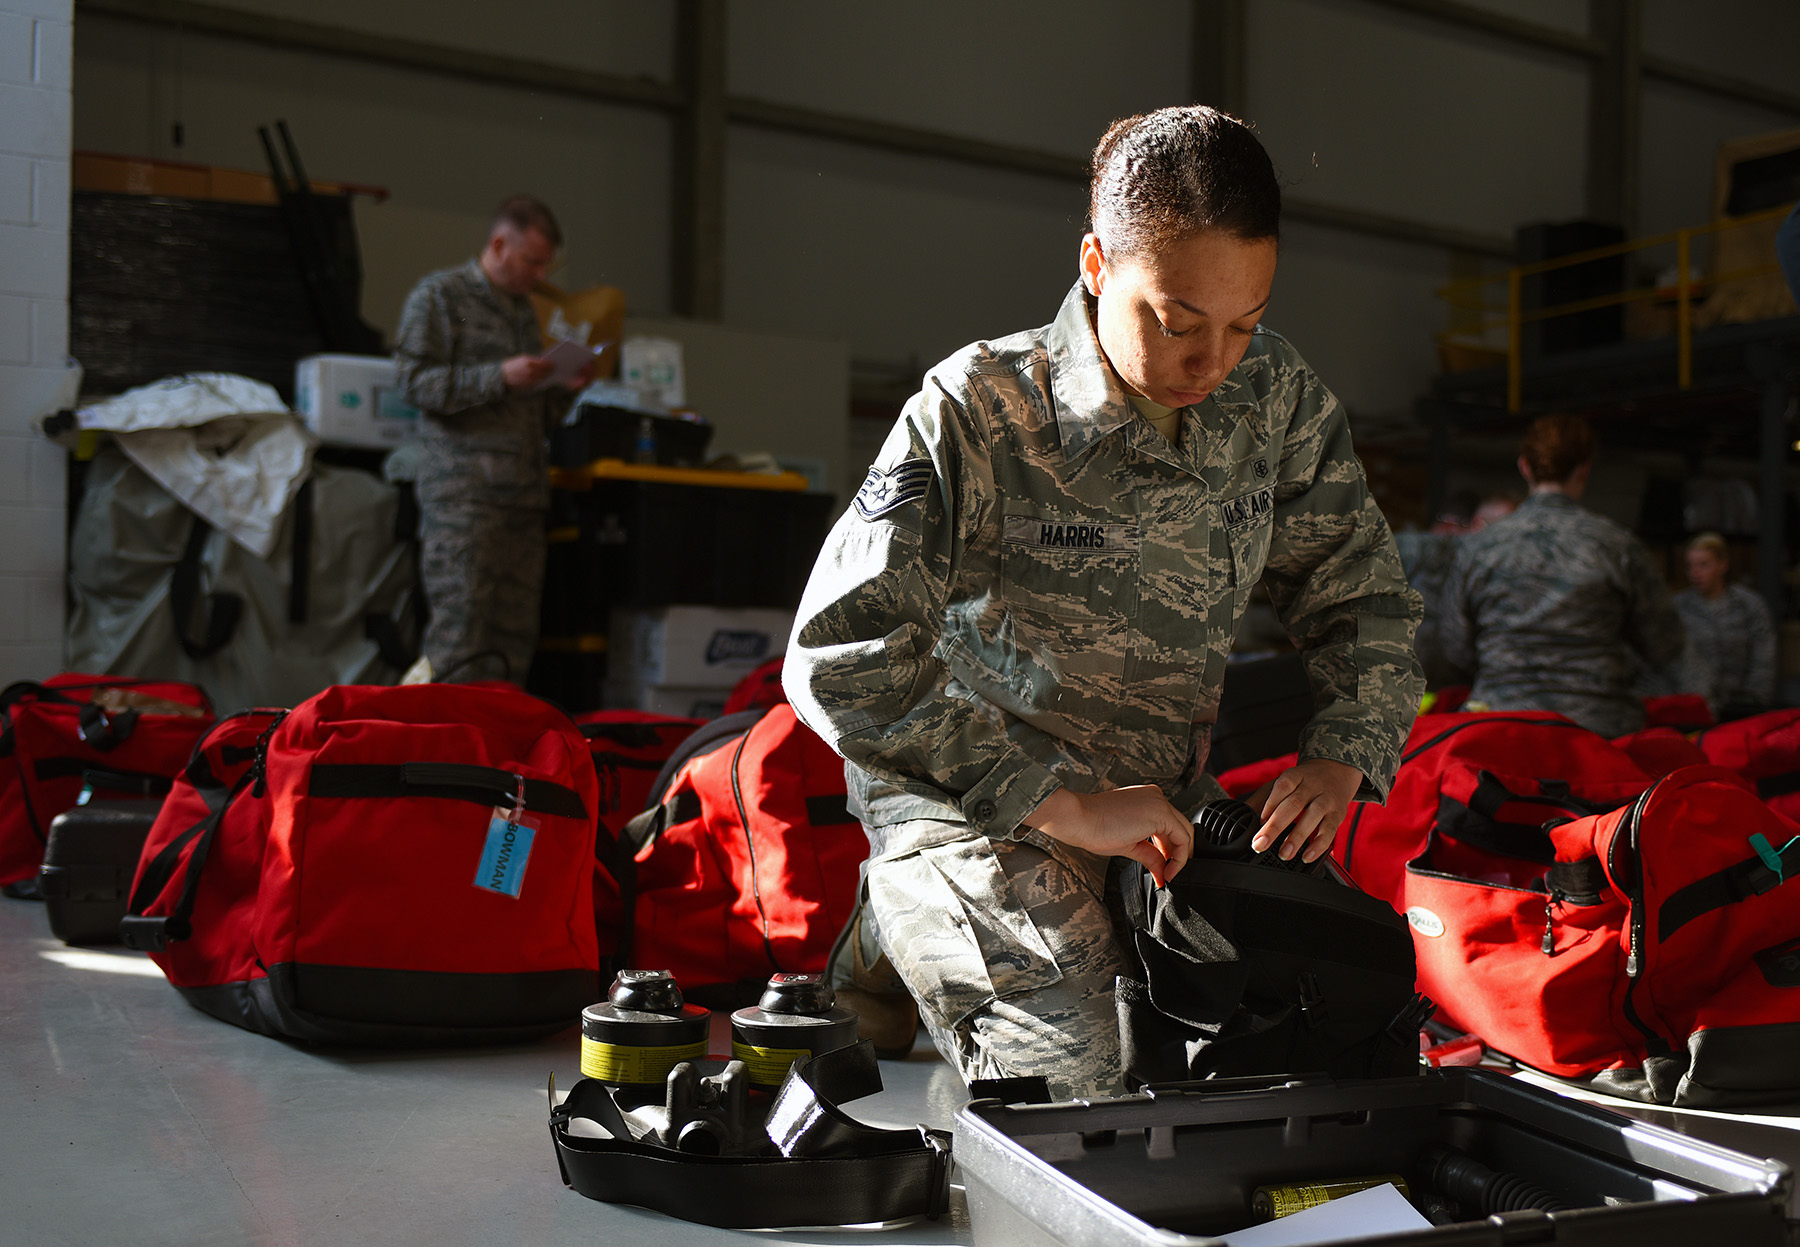 A biomedical equipment technician with the 121st Medical Group of the Ohio National Guard packs her gear for a training event.